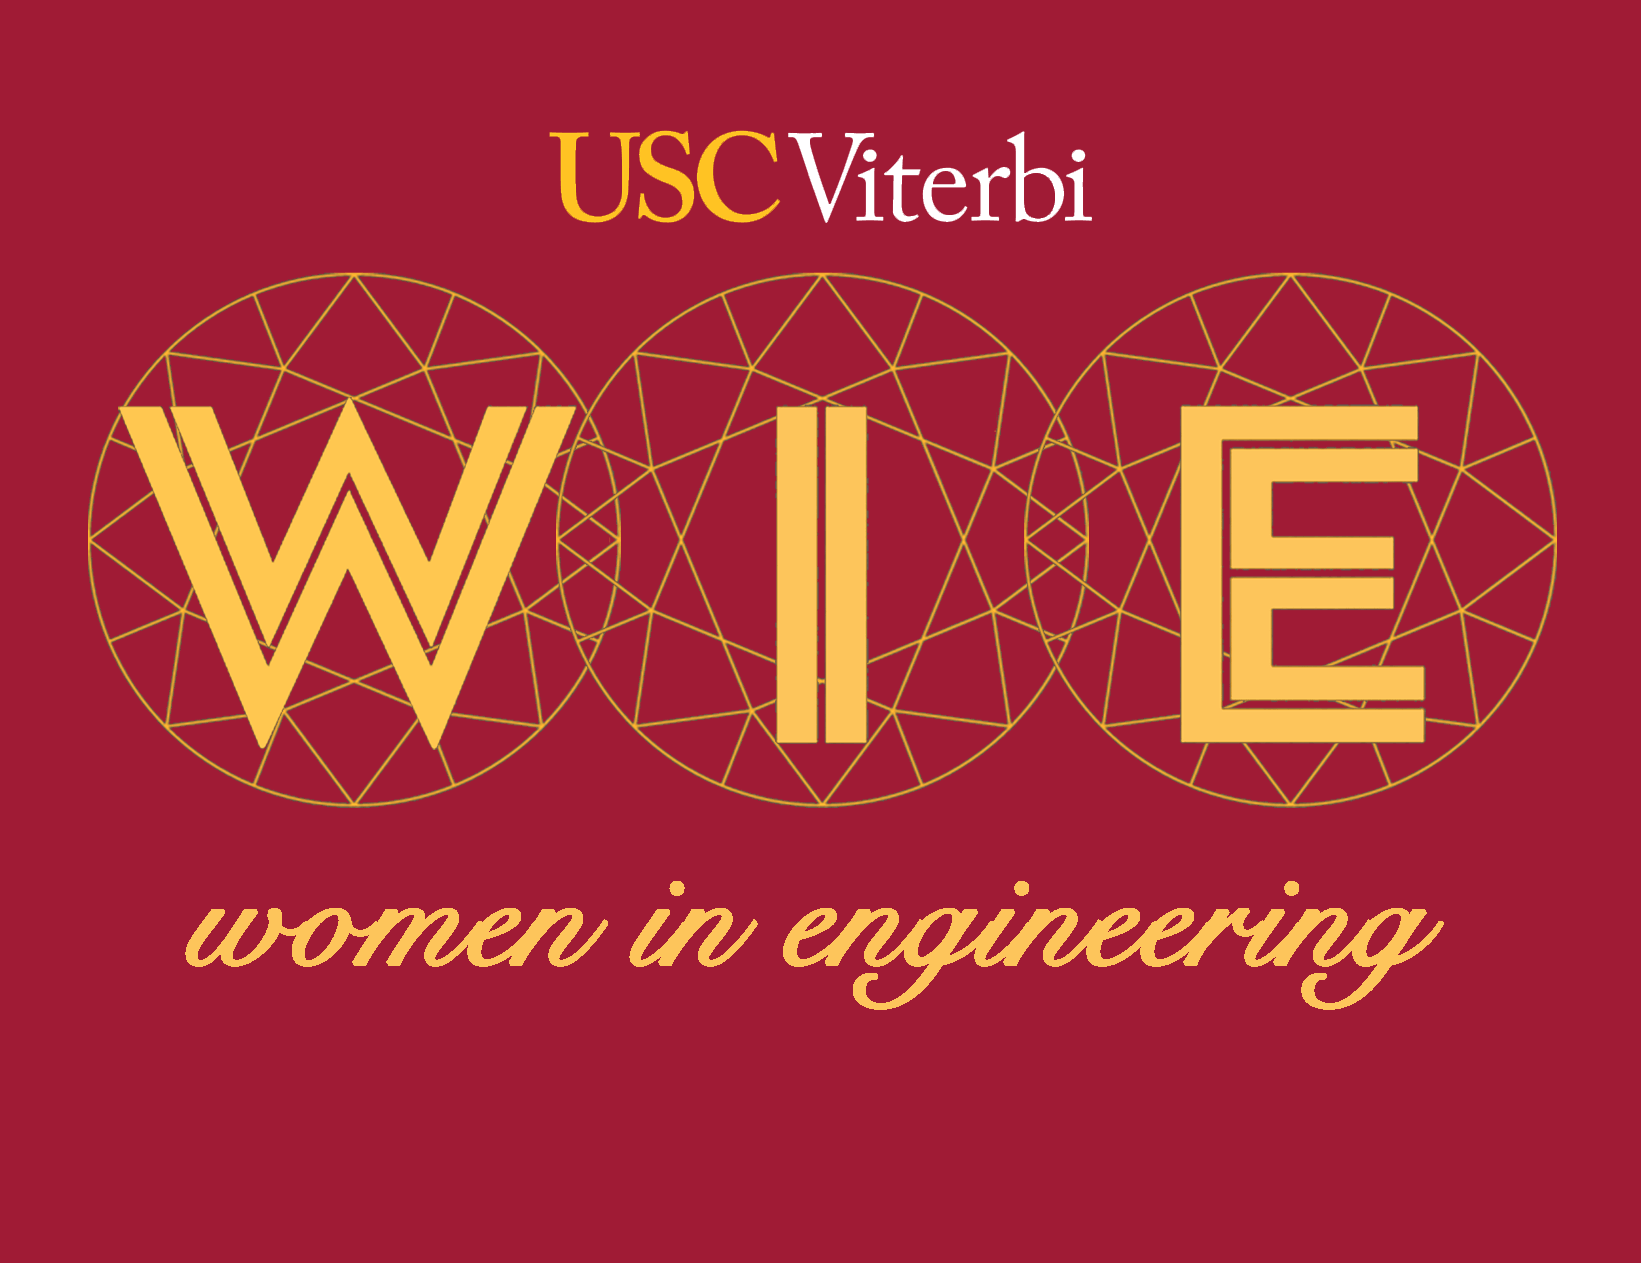 Featured image for “Women in Engineering Fall 2020 Launch”